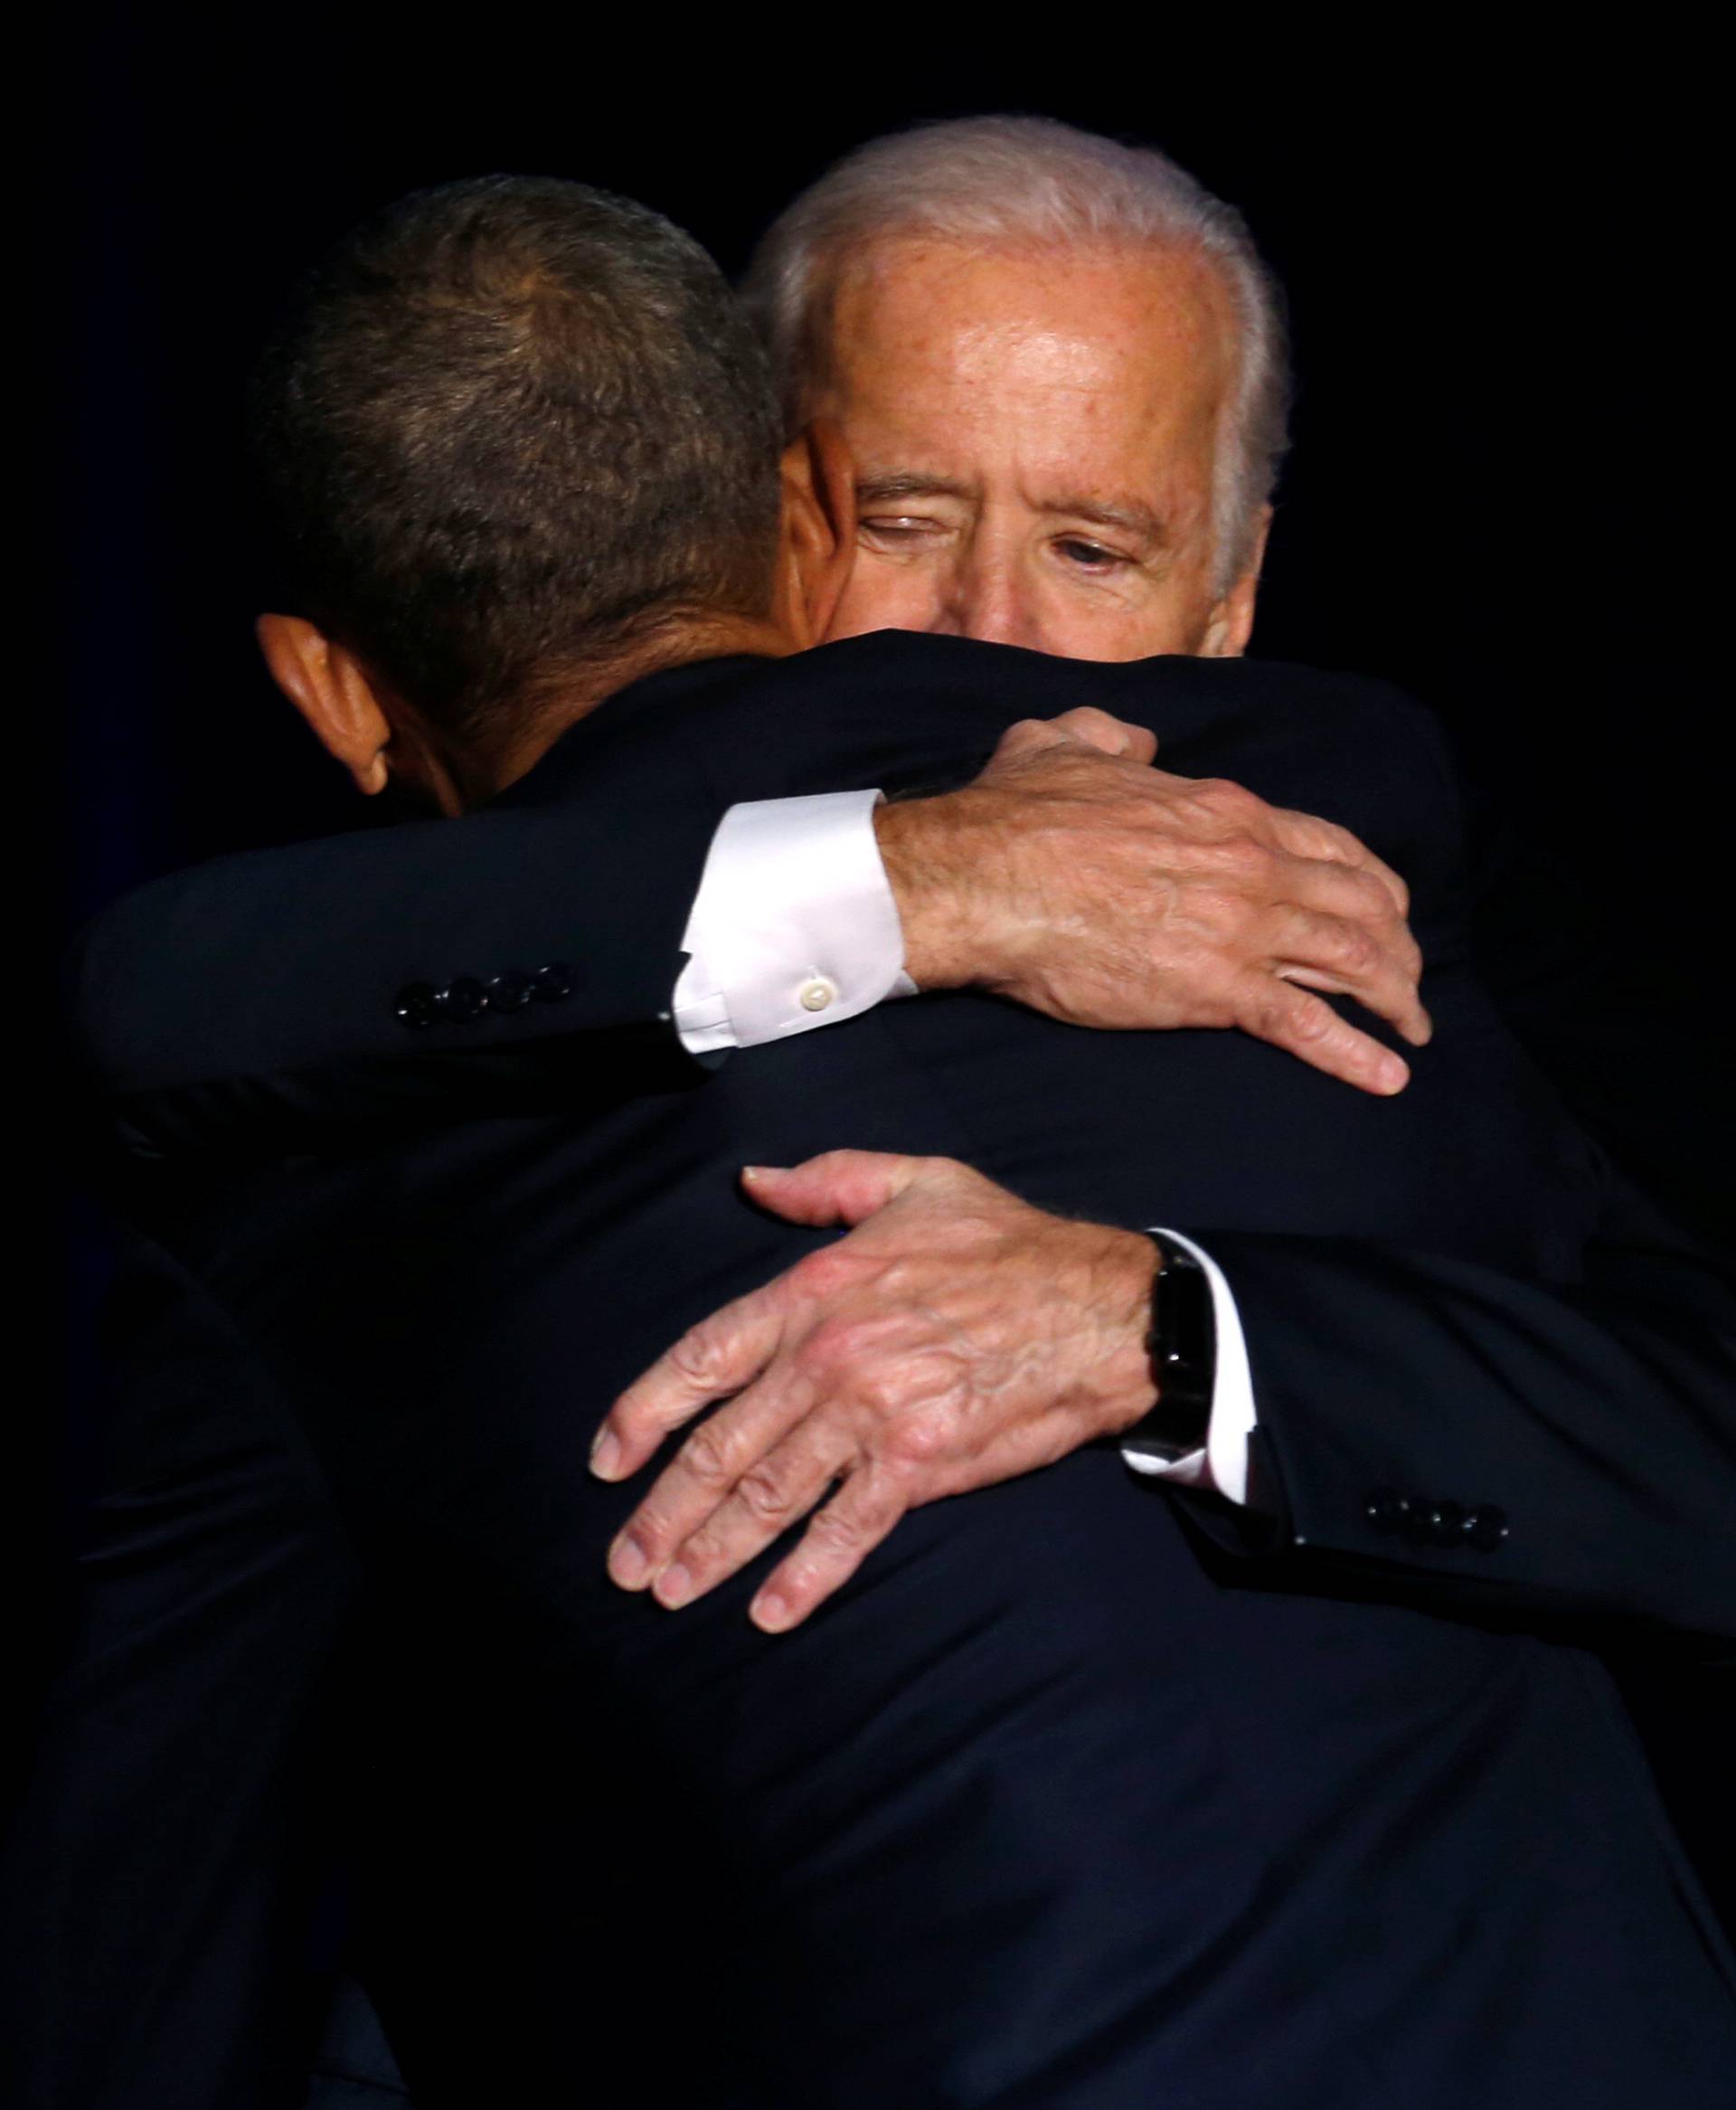 U.S. President Barack Obama is joined onstage by Vice President Joe Biden after his farewell address in Chicago